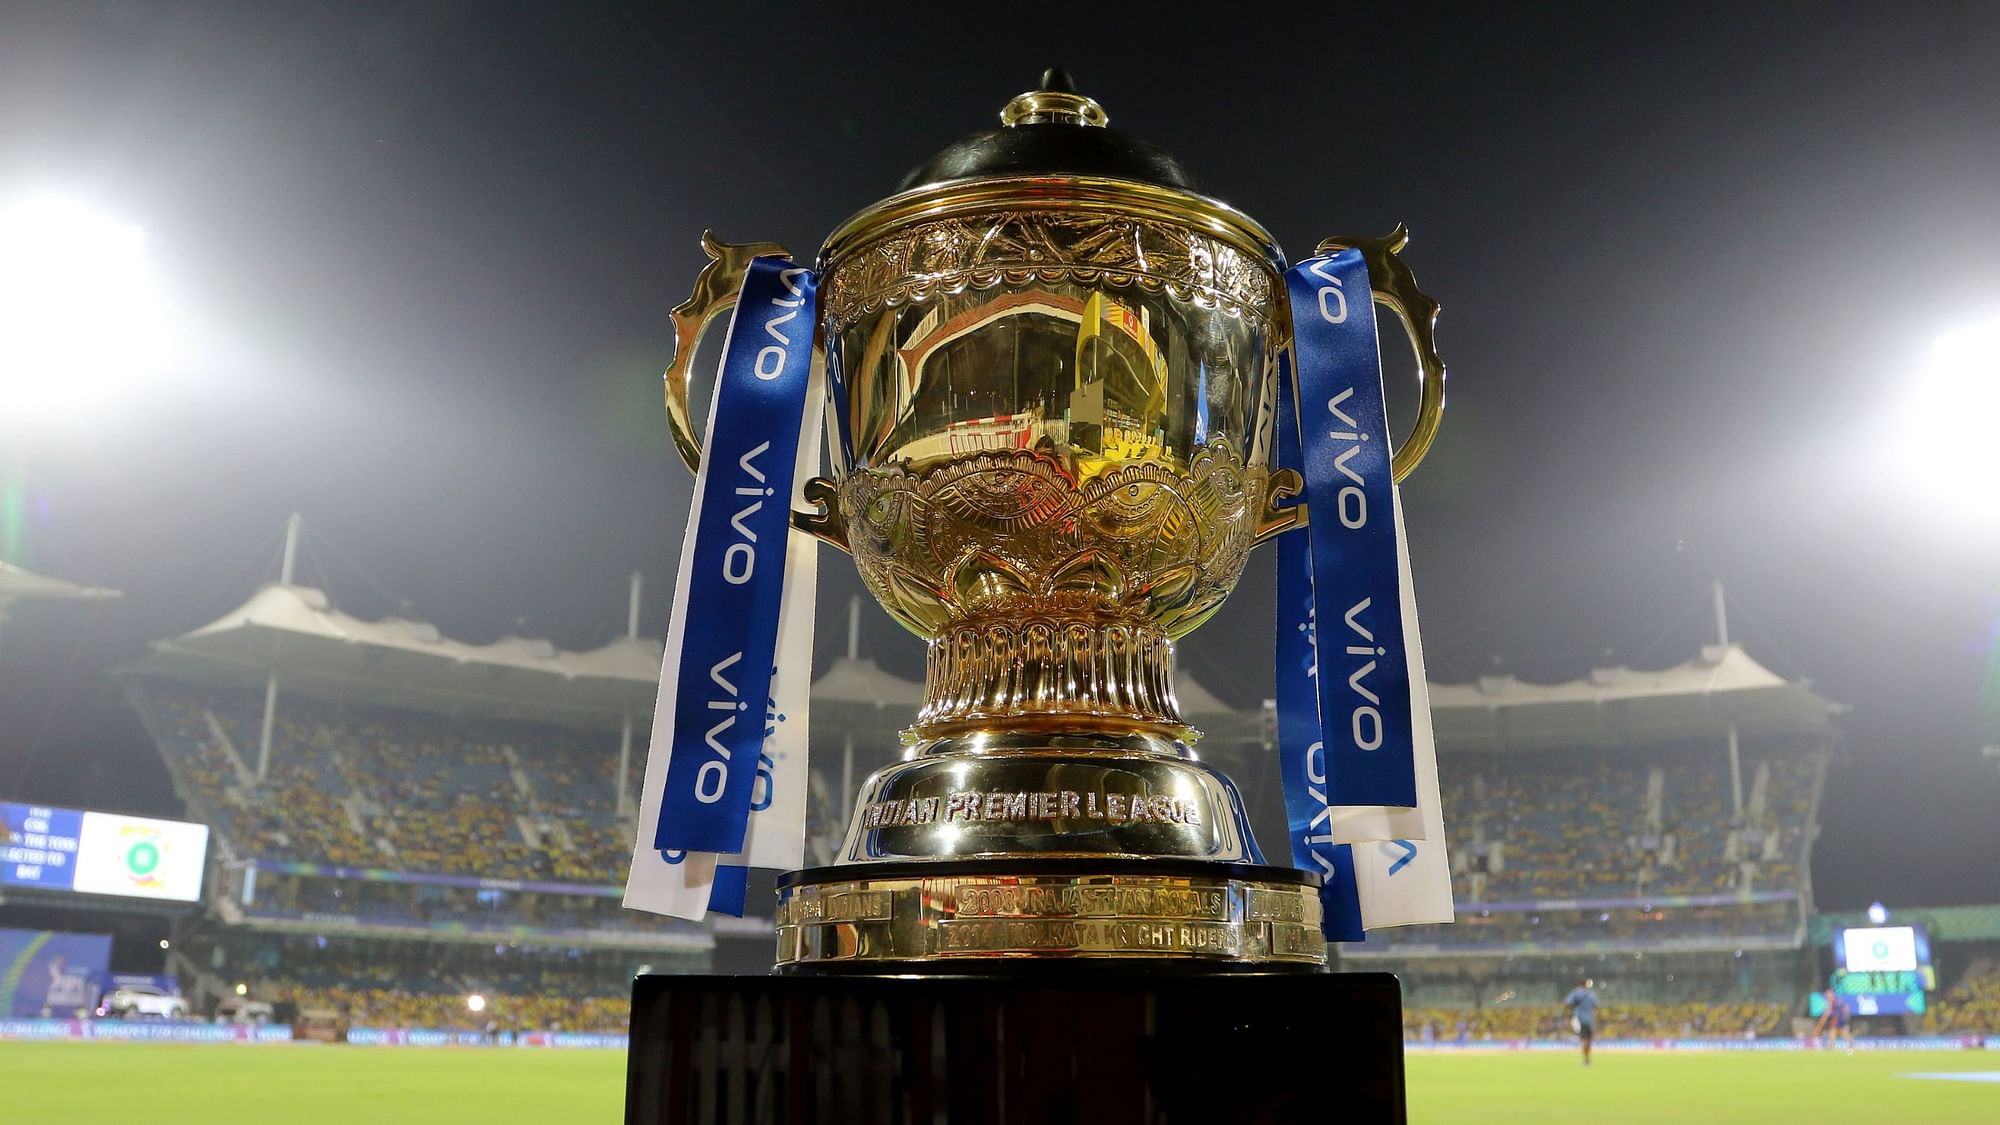 The New Zealand Cricket Board have clarified that they have neither offered to host, nor received an offer from the BCCI to host the 2020 IPL.